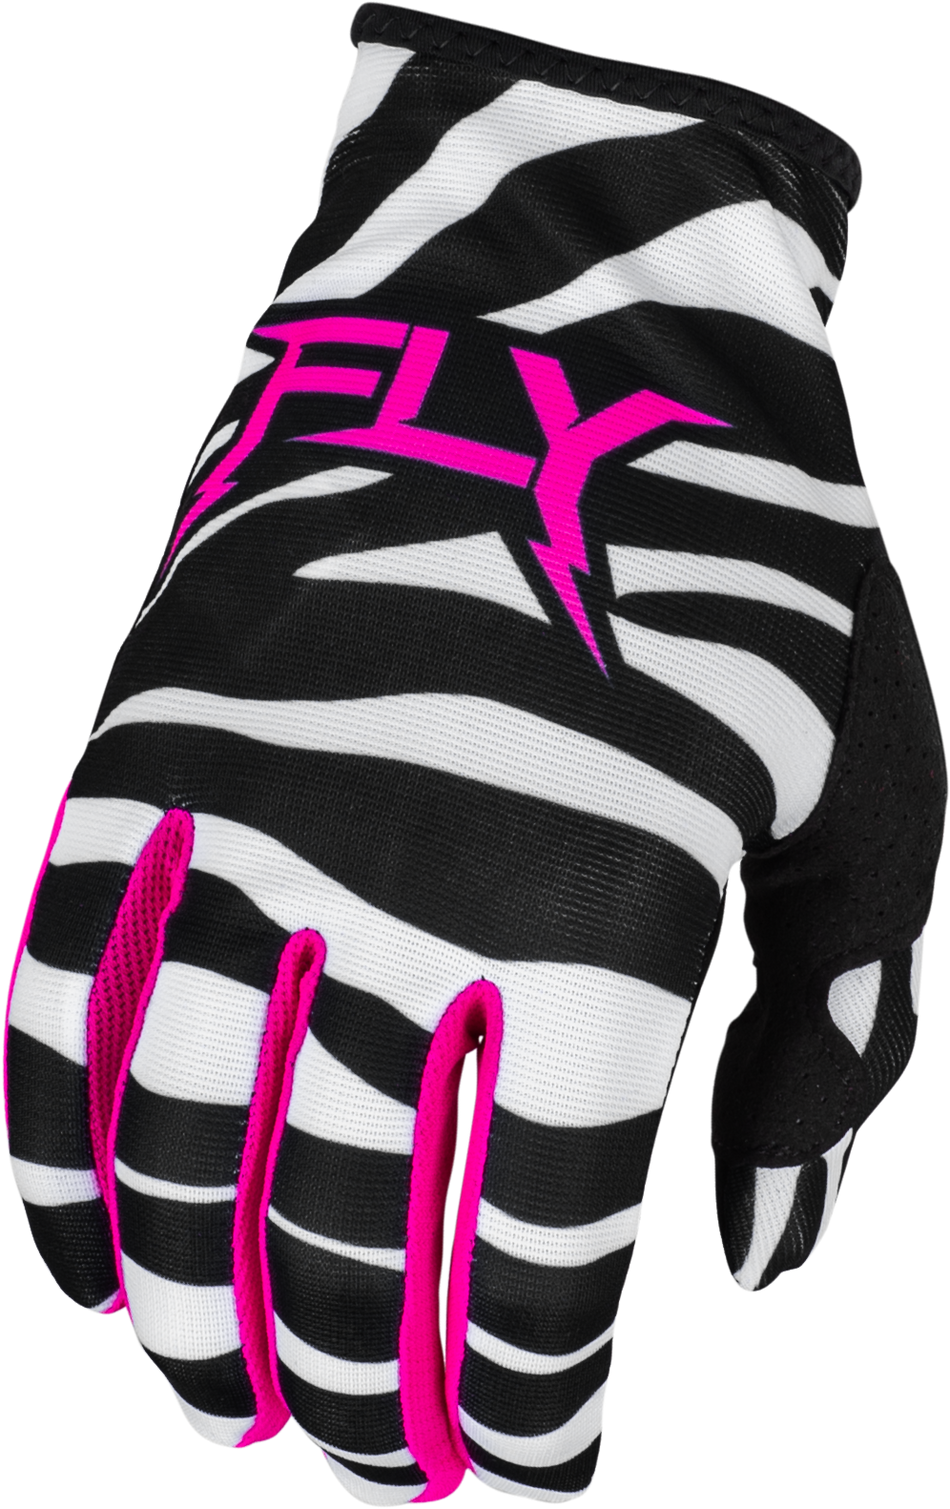 FLY RACING Lite Uncaged Gloves Black/White/Neon Pink 3x 377-7413X